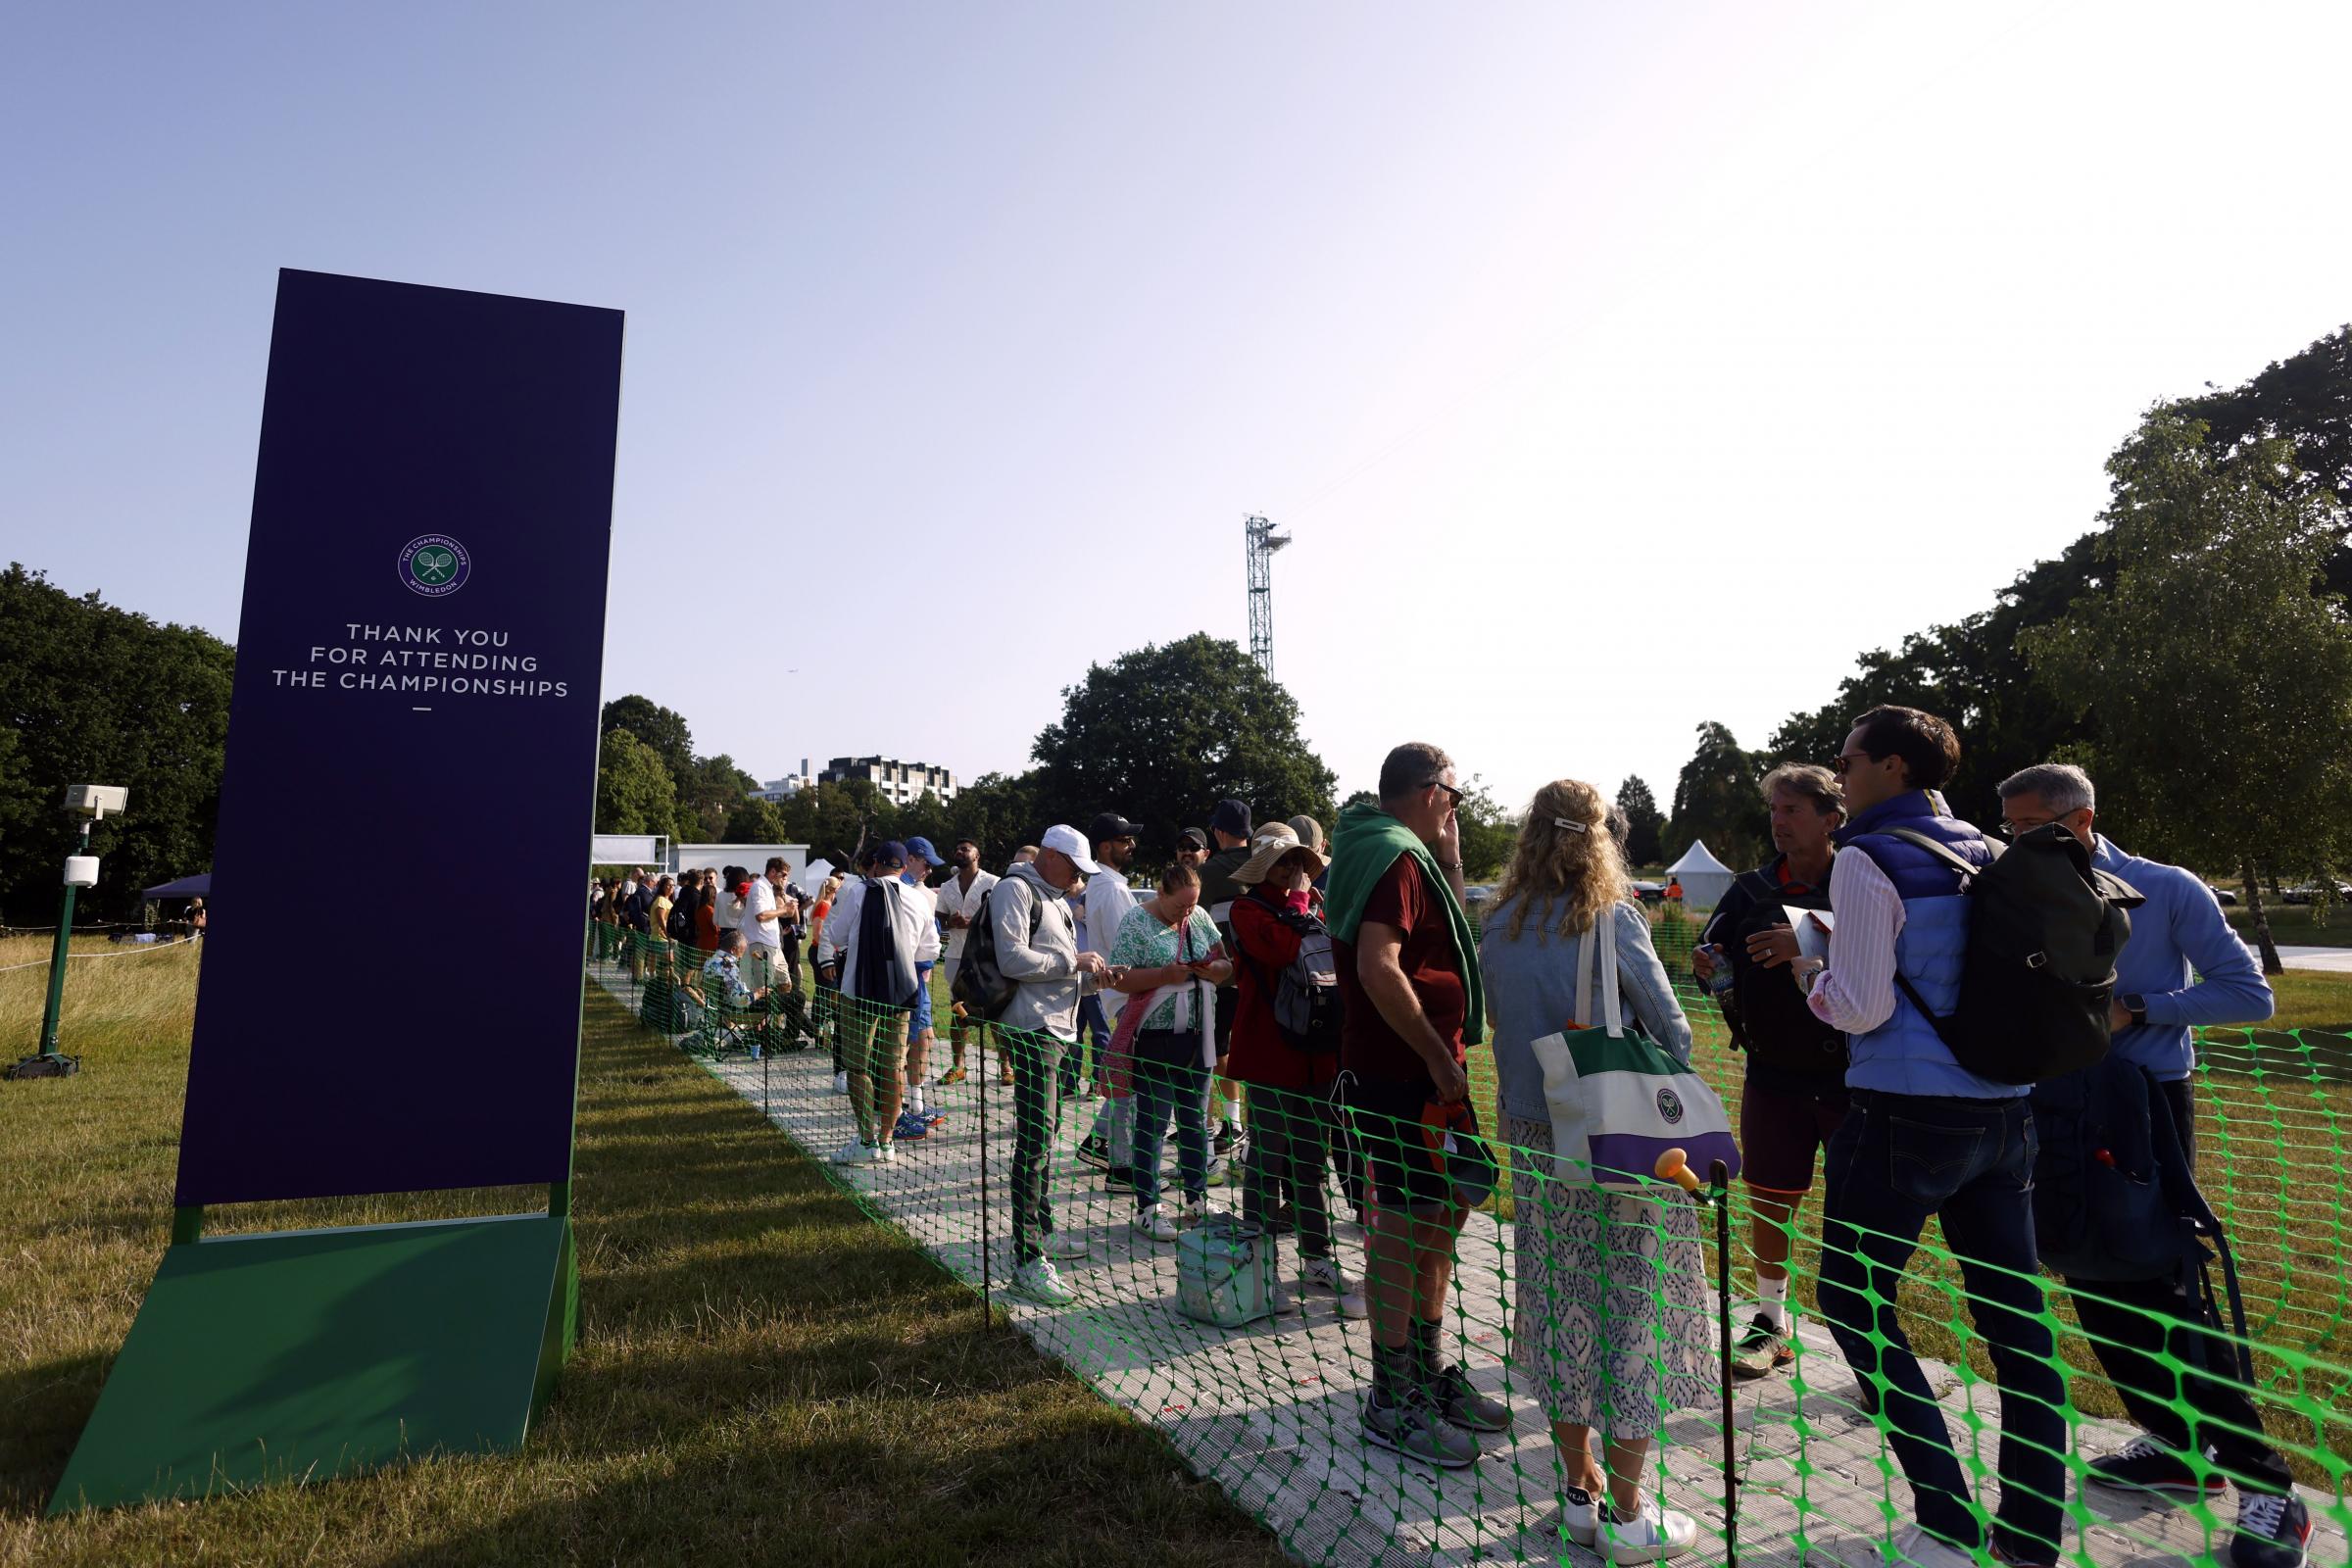 Fans welcomed at Wimbledon on first day of tennis 